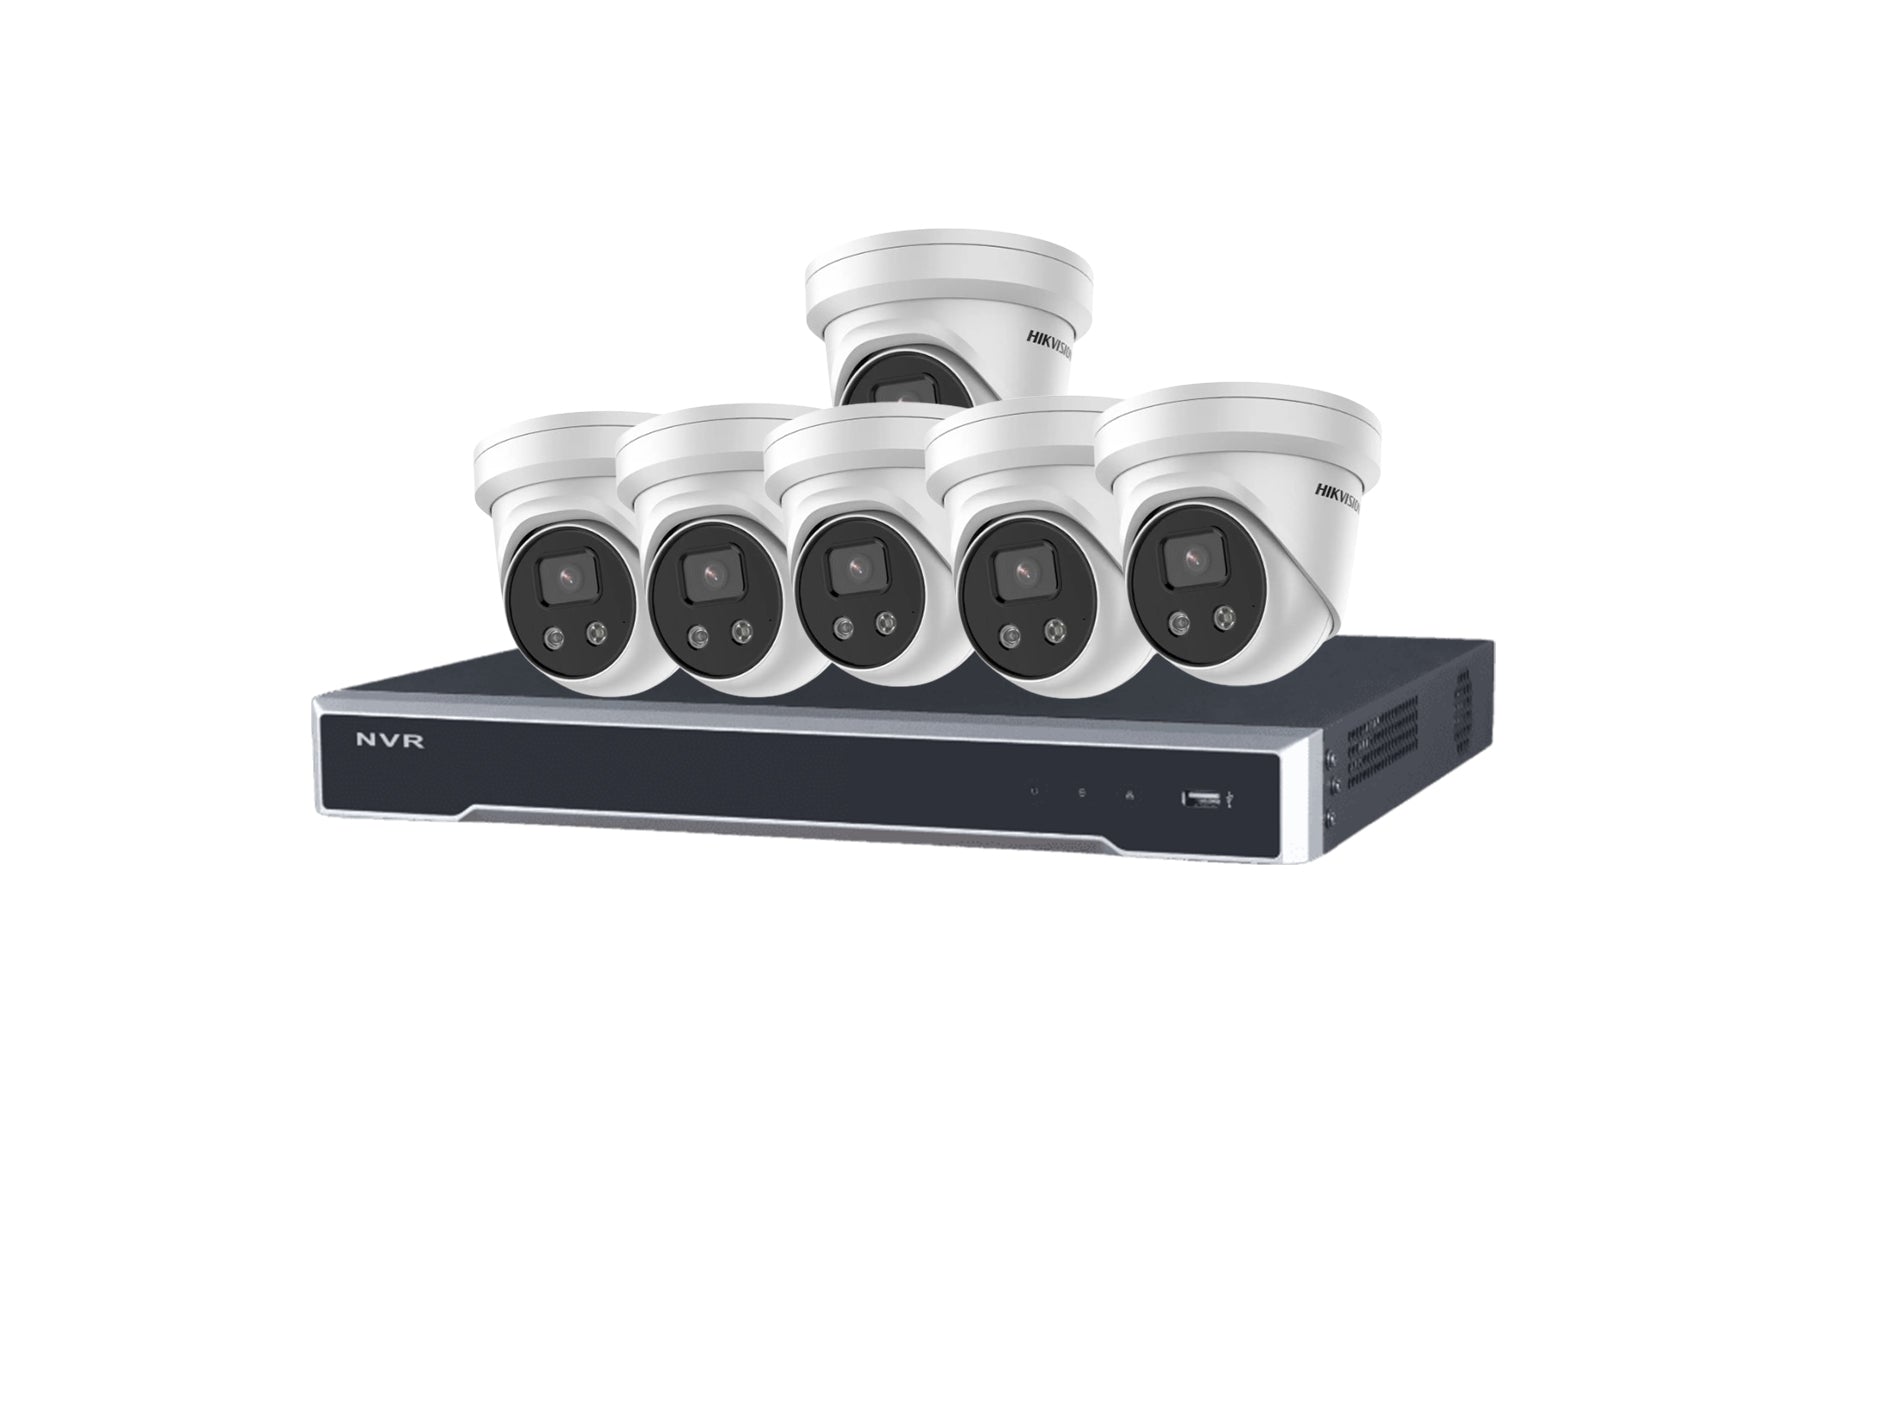 Hikvision 2CD2386G2-I2 8MP 6x cameras with 8 Channel NVR + HDD CCTV Kit